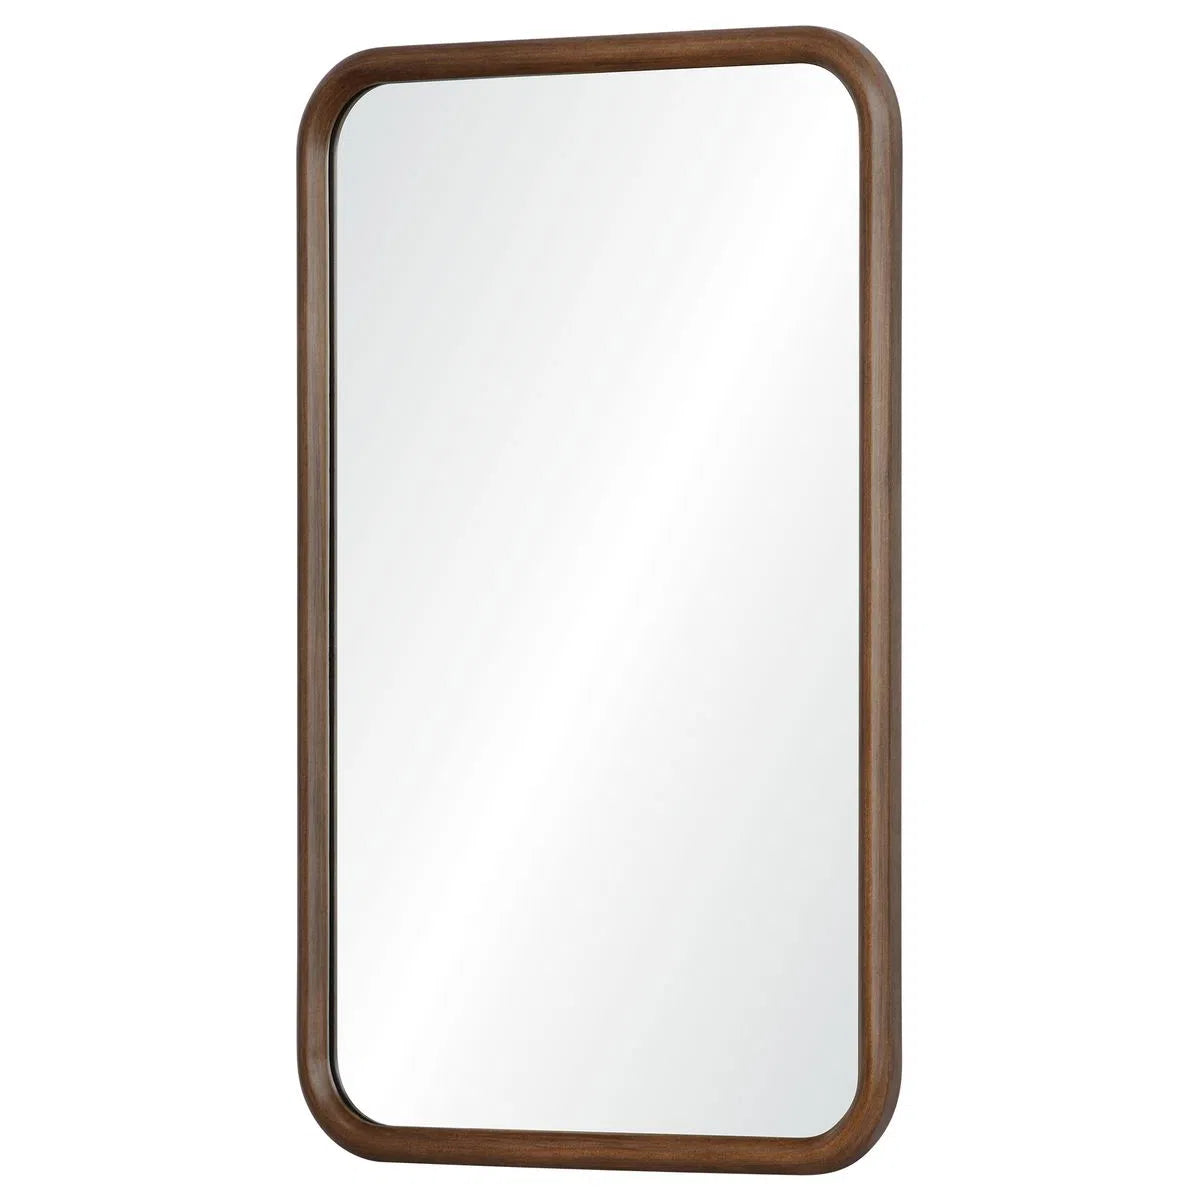 Picture of Dickens Mirror